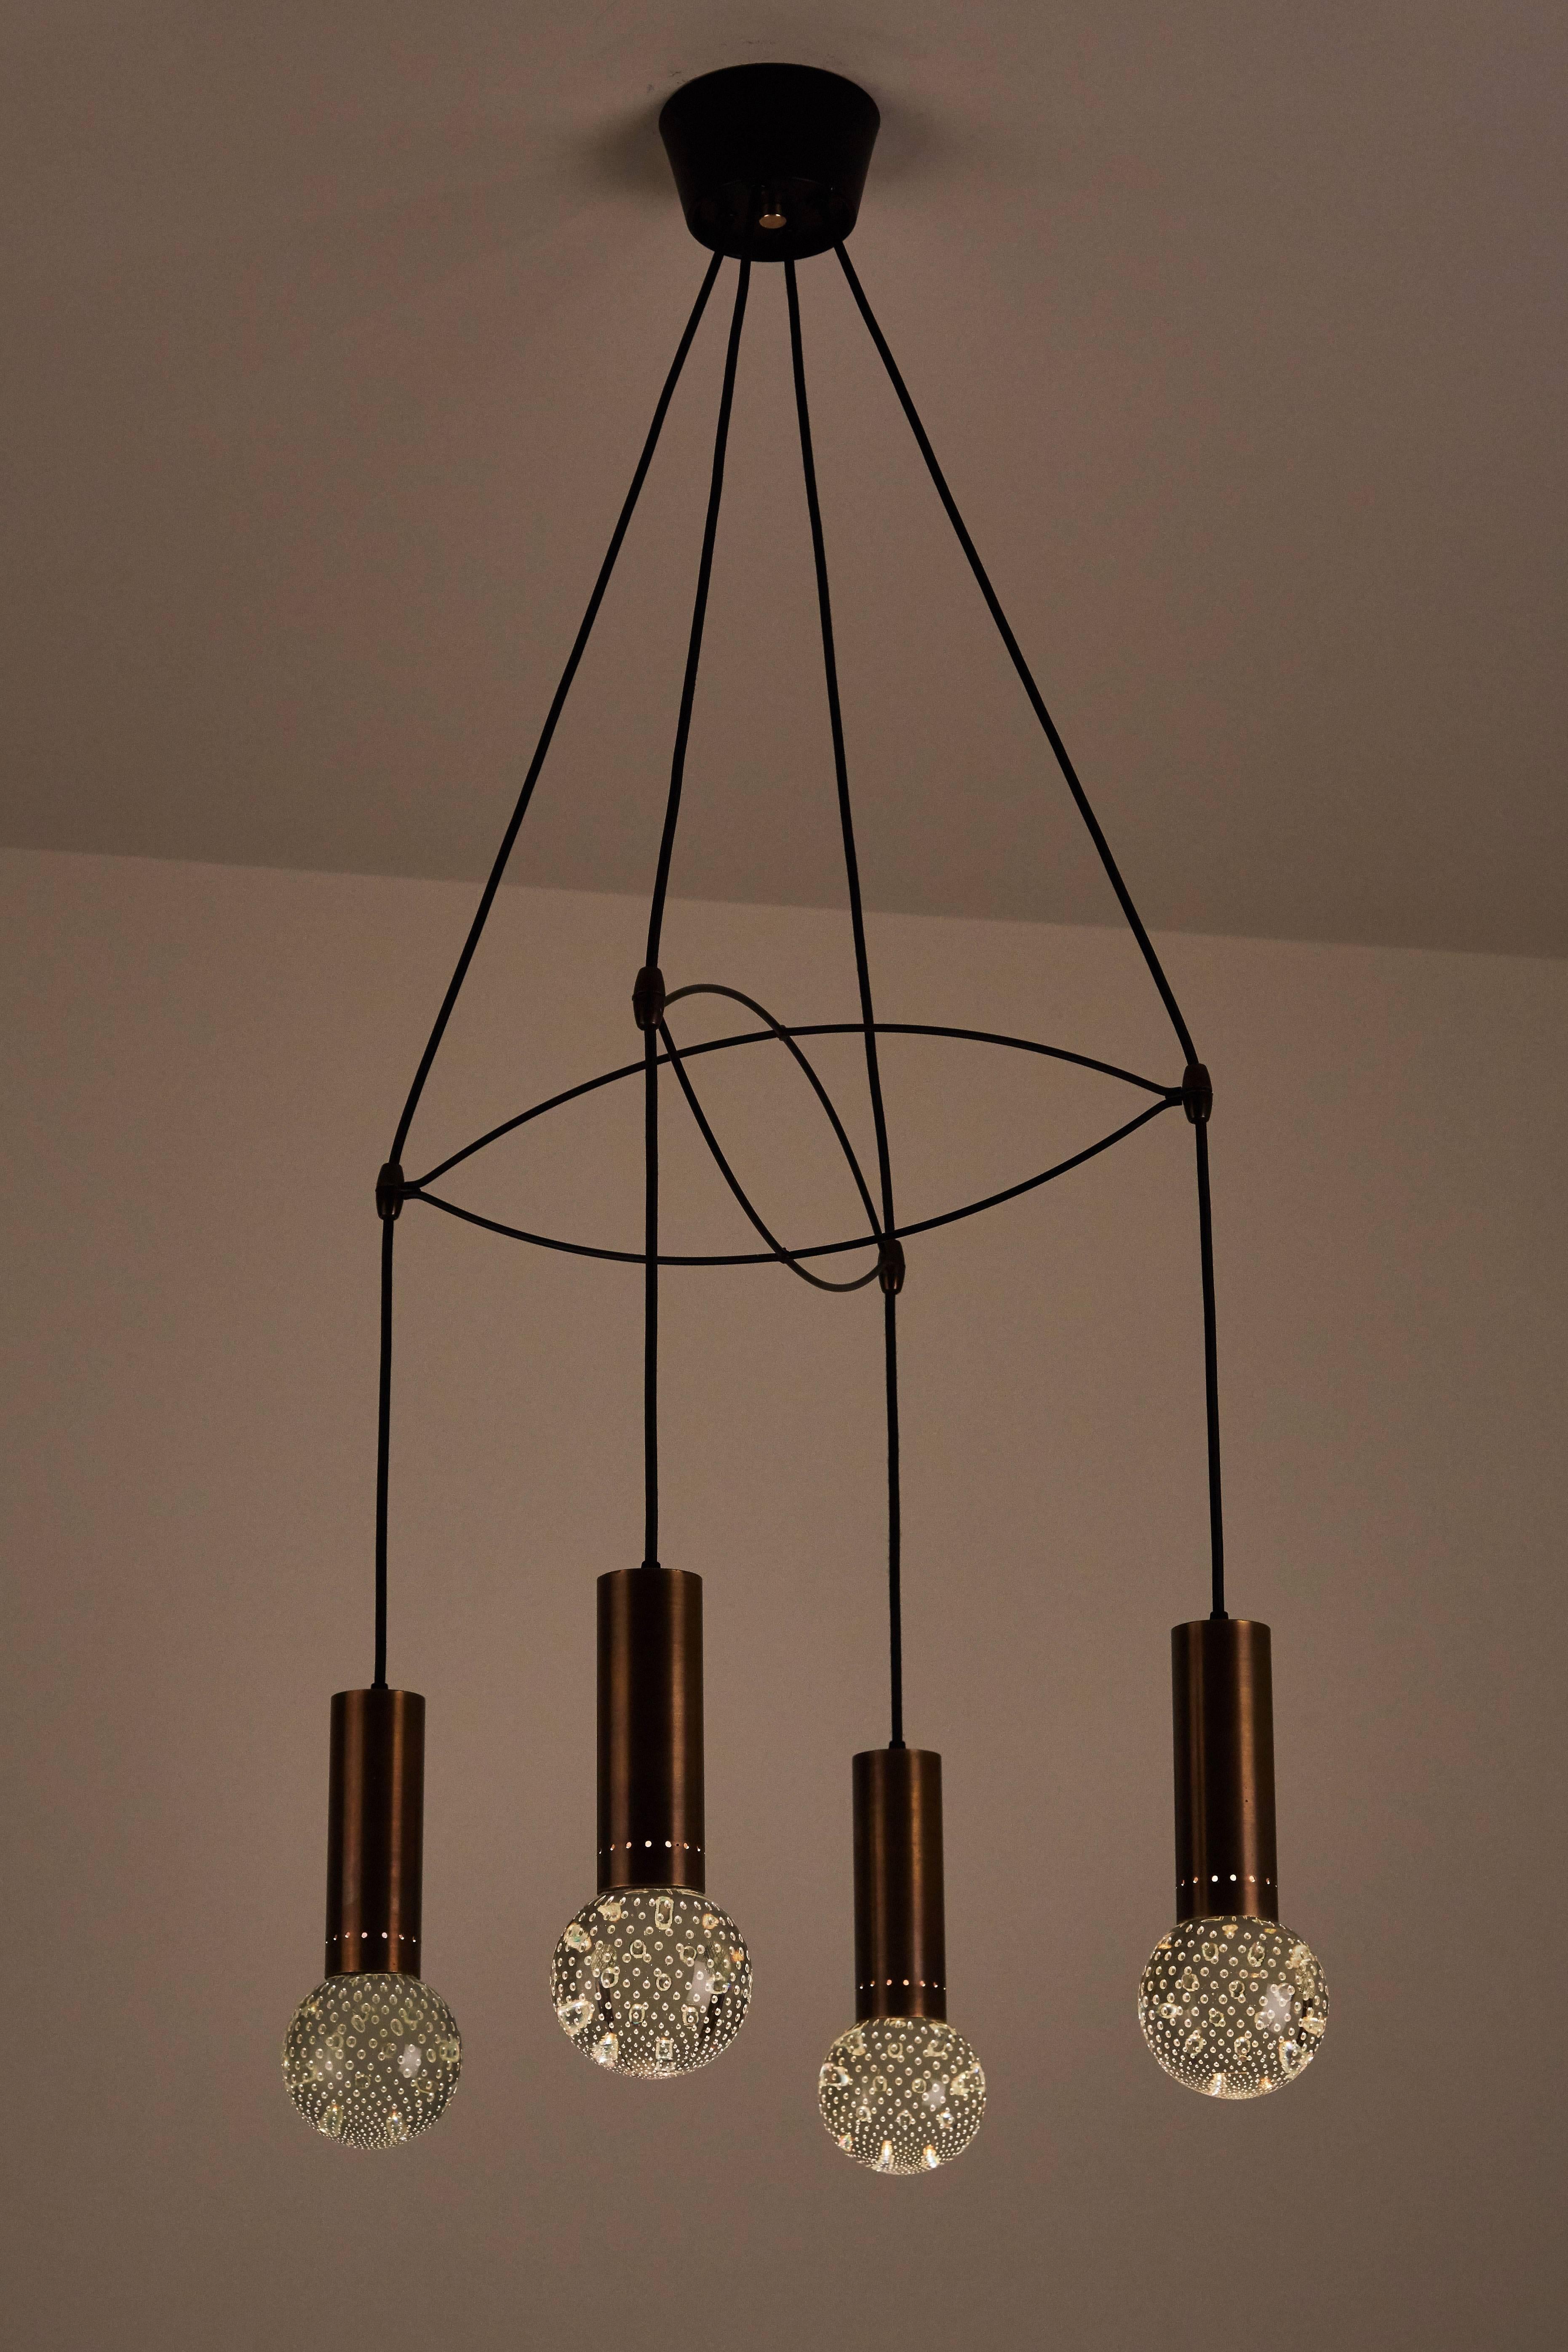 Italian four globe suspension light handblown glass, brass, enameled steel and rubber. Designed in Italy circa 1950s. Original canopy. Wired for us junction boxes. Each globe takes an e14 60 W maximum bulb.
   